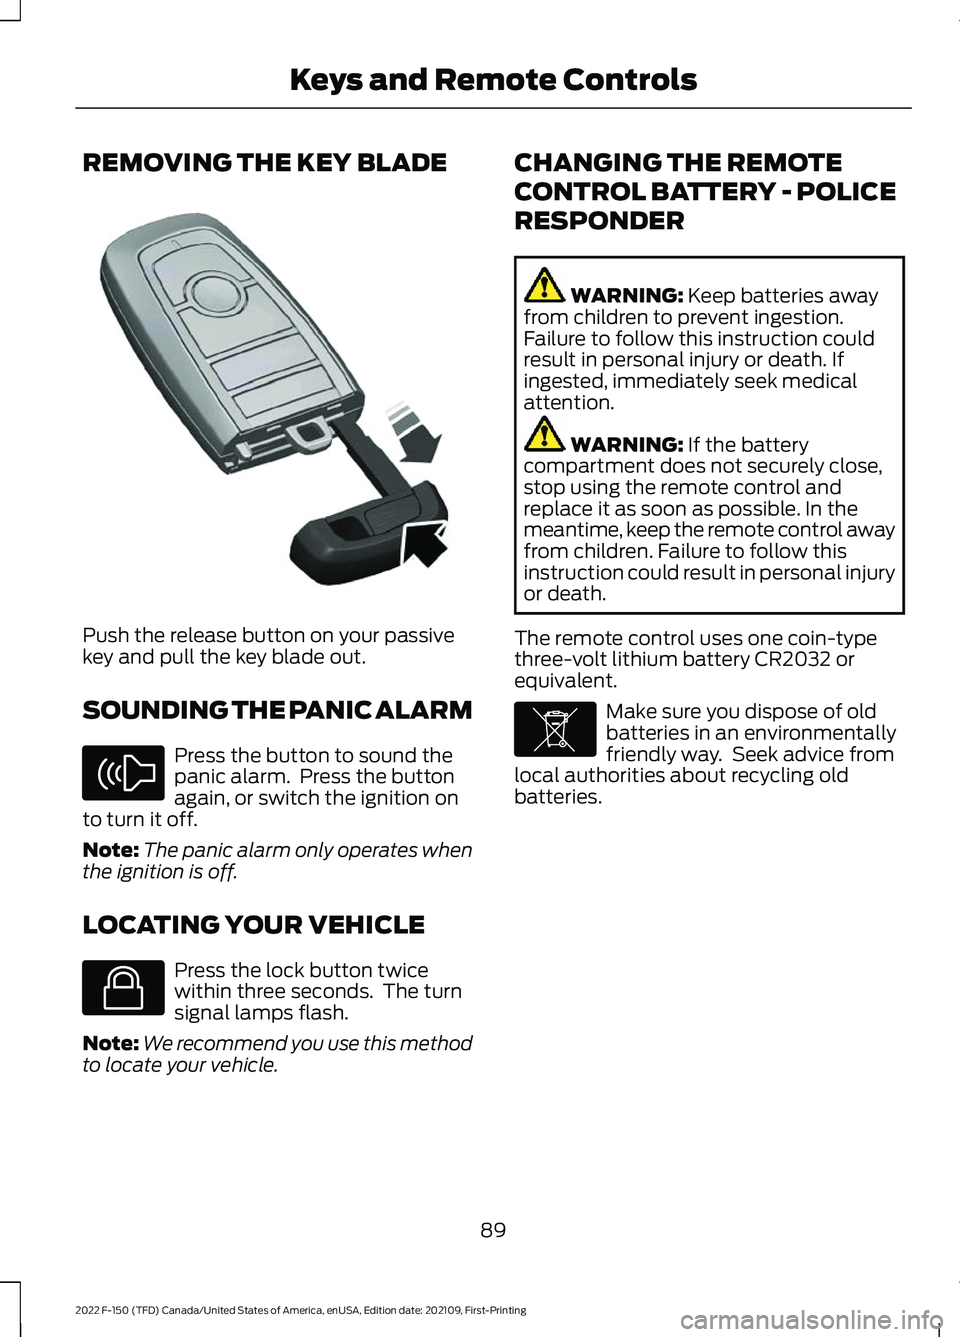 FORD F-150 2022  Owners Manual REMOVING THE KEY BLADE
Push the release button on your passive
key and pull the key blade out.
SOUNDING THE PANIC ALARM
Press the button to sound the
panic alarm.  Press the button
again, or switch th